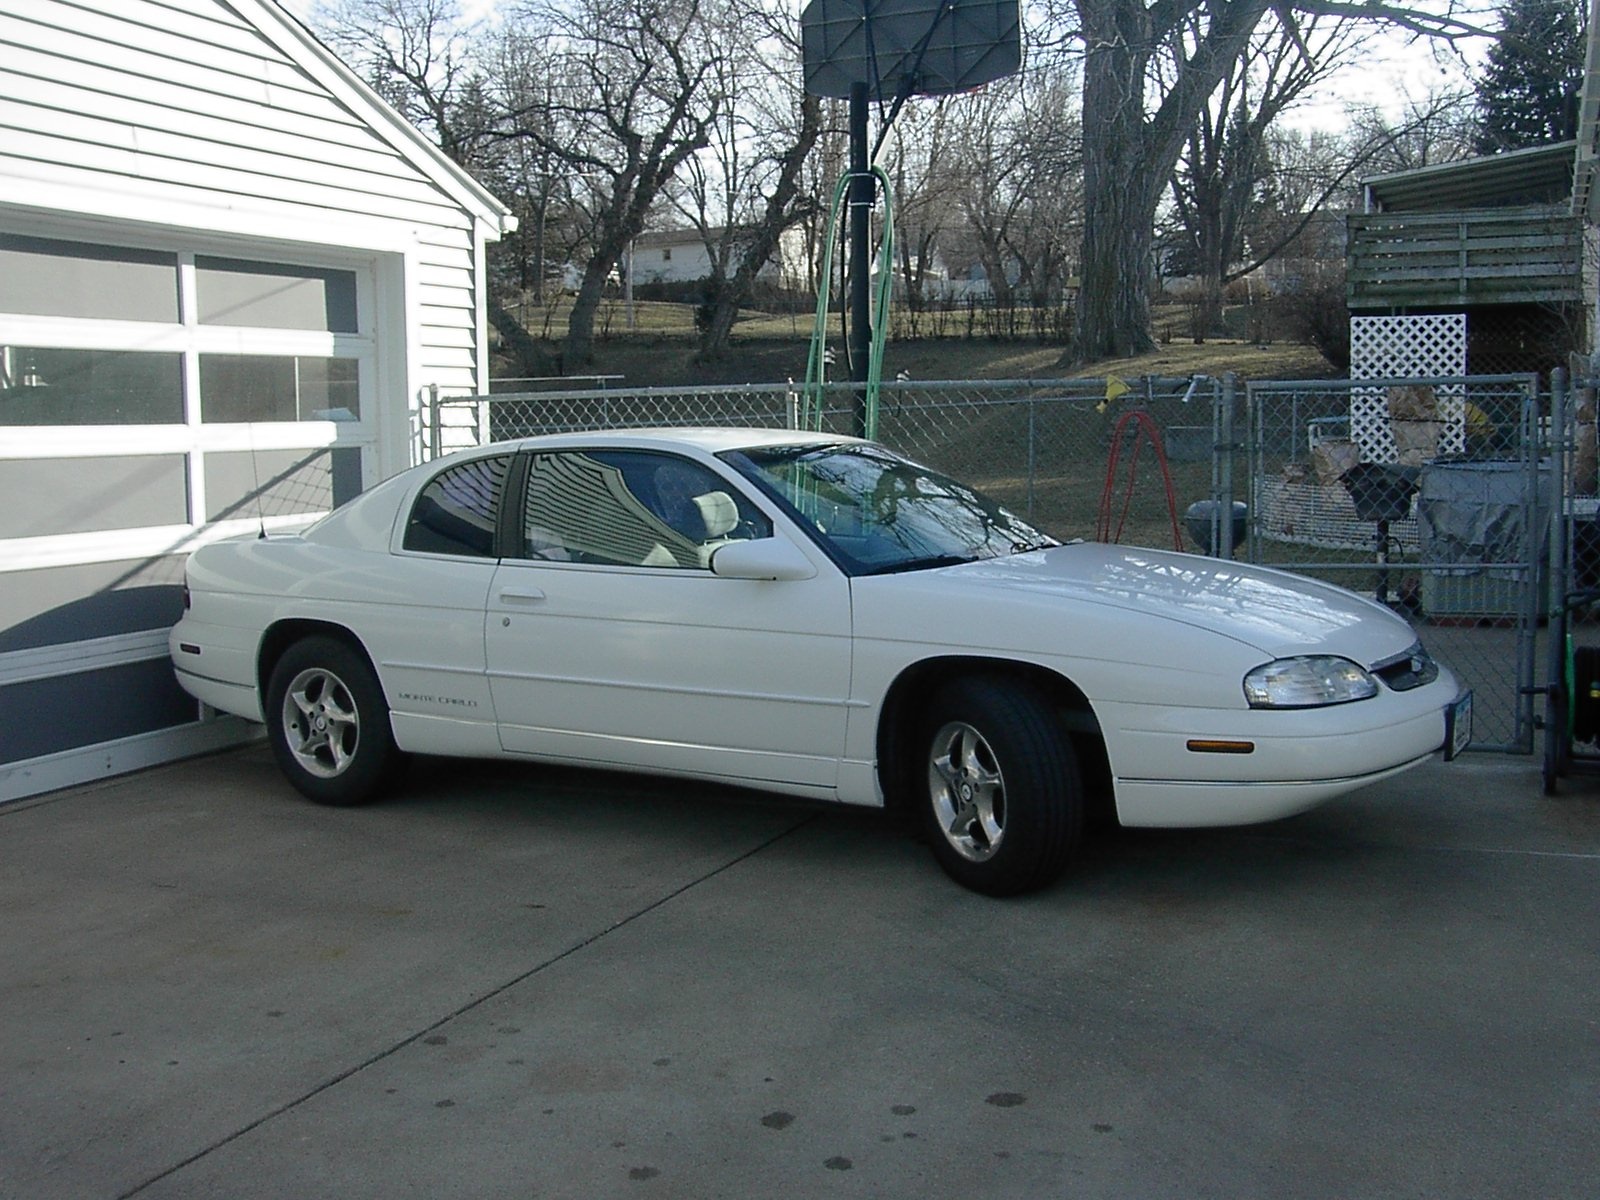 1997 Chevrolet Monte Carlo: Prices, Reviews & Pictures - CarGurus